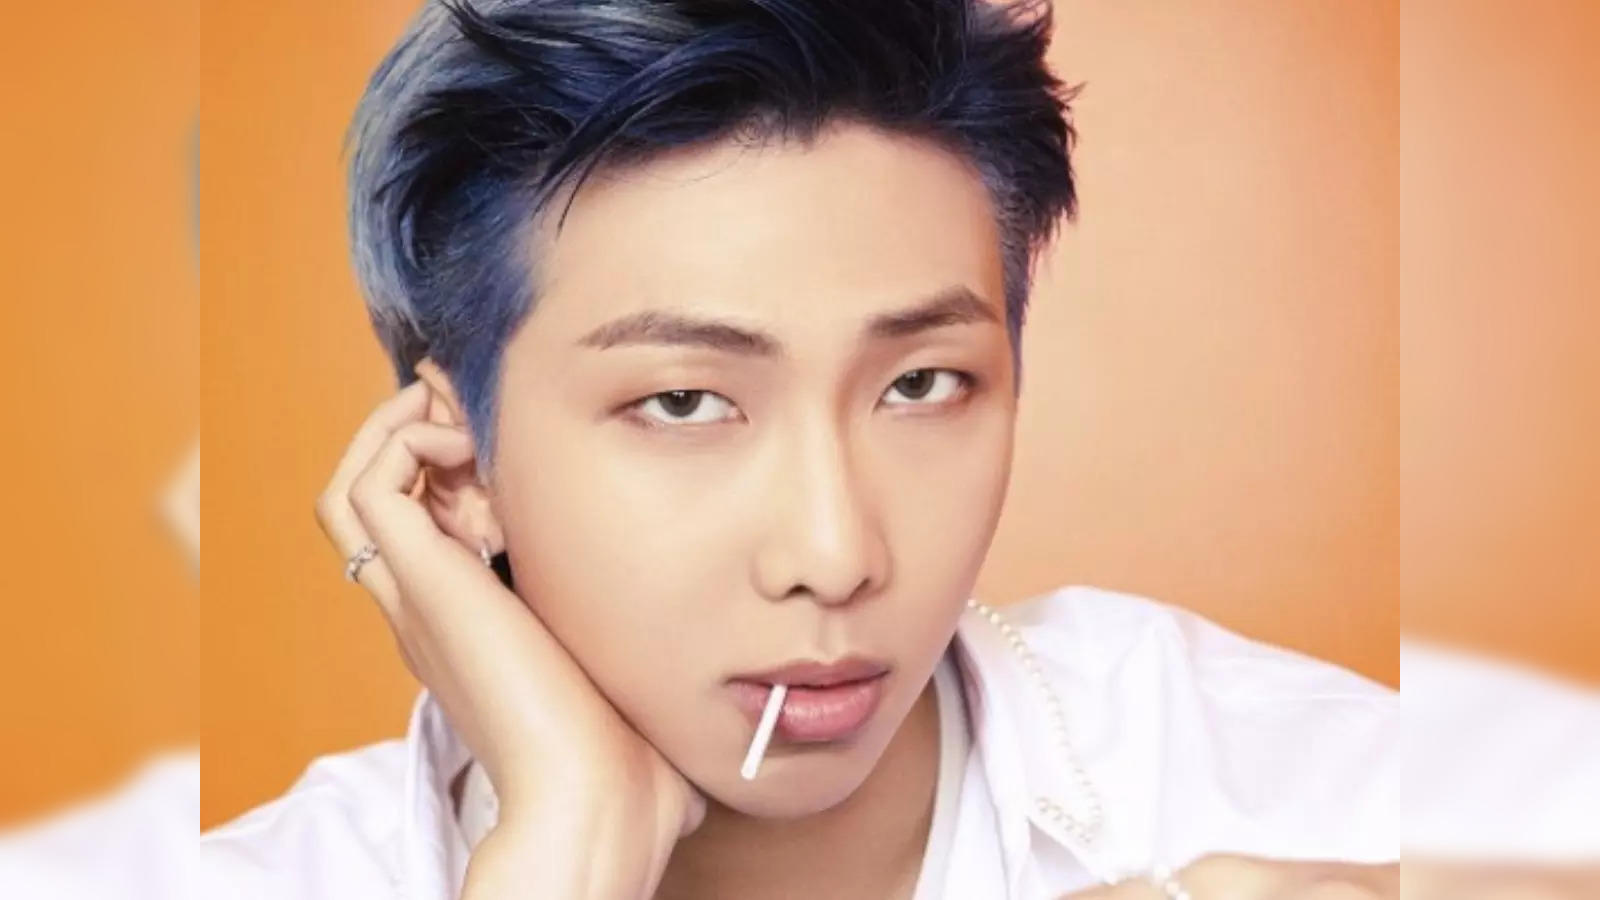 BTS' RM talks about group reuniting in 2025 after their military